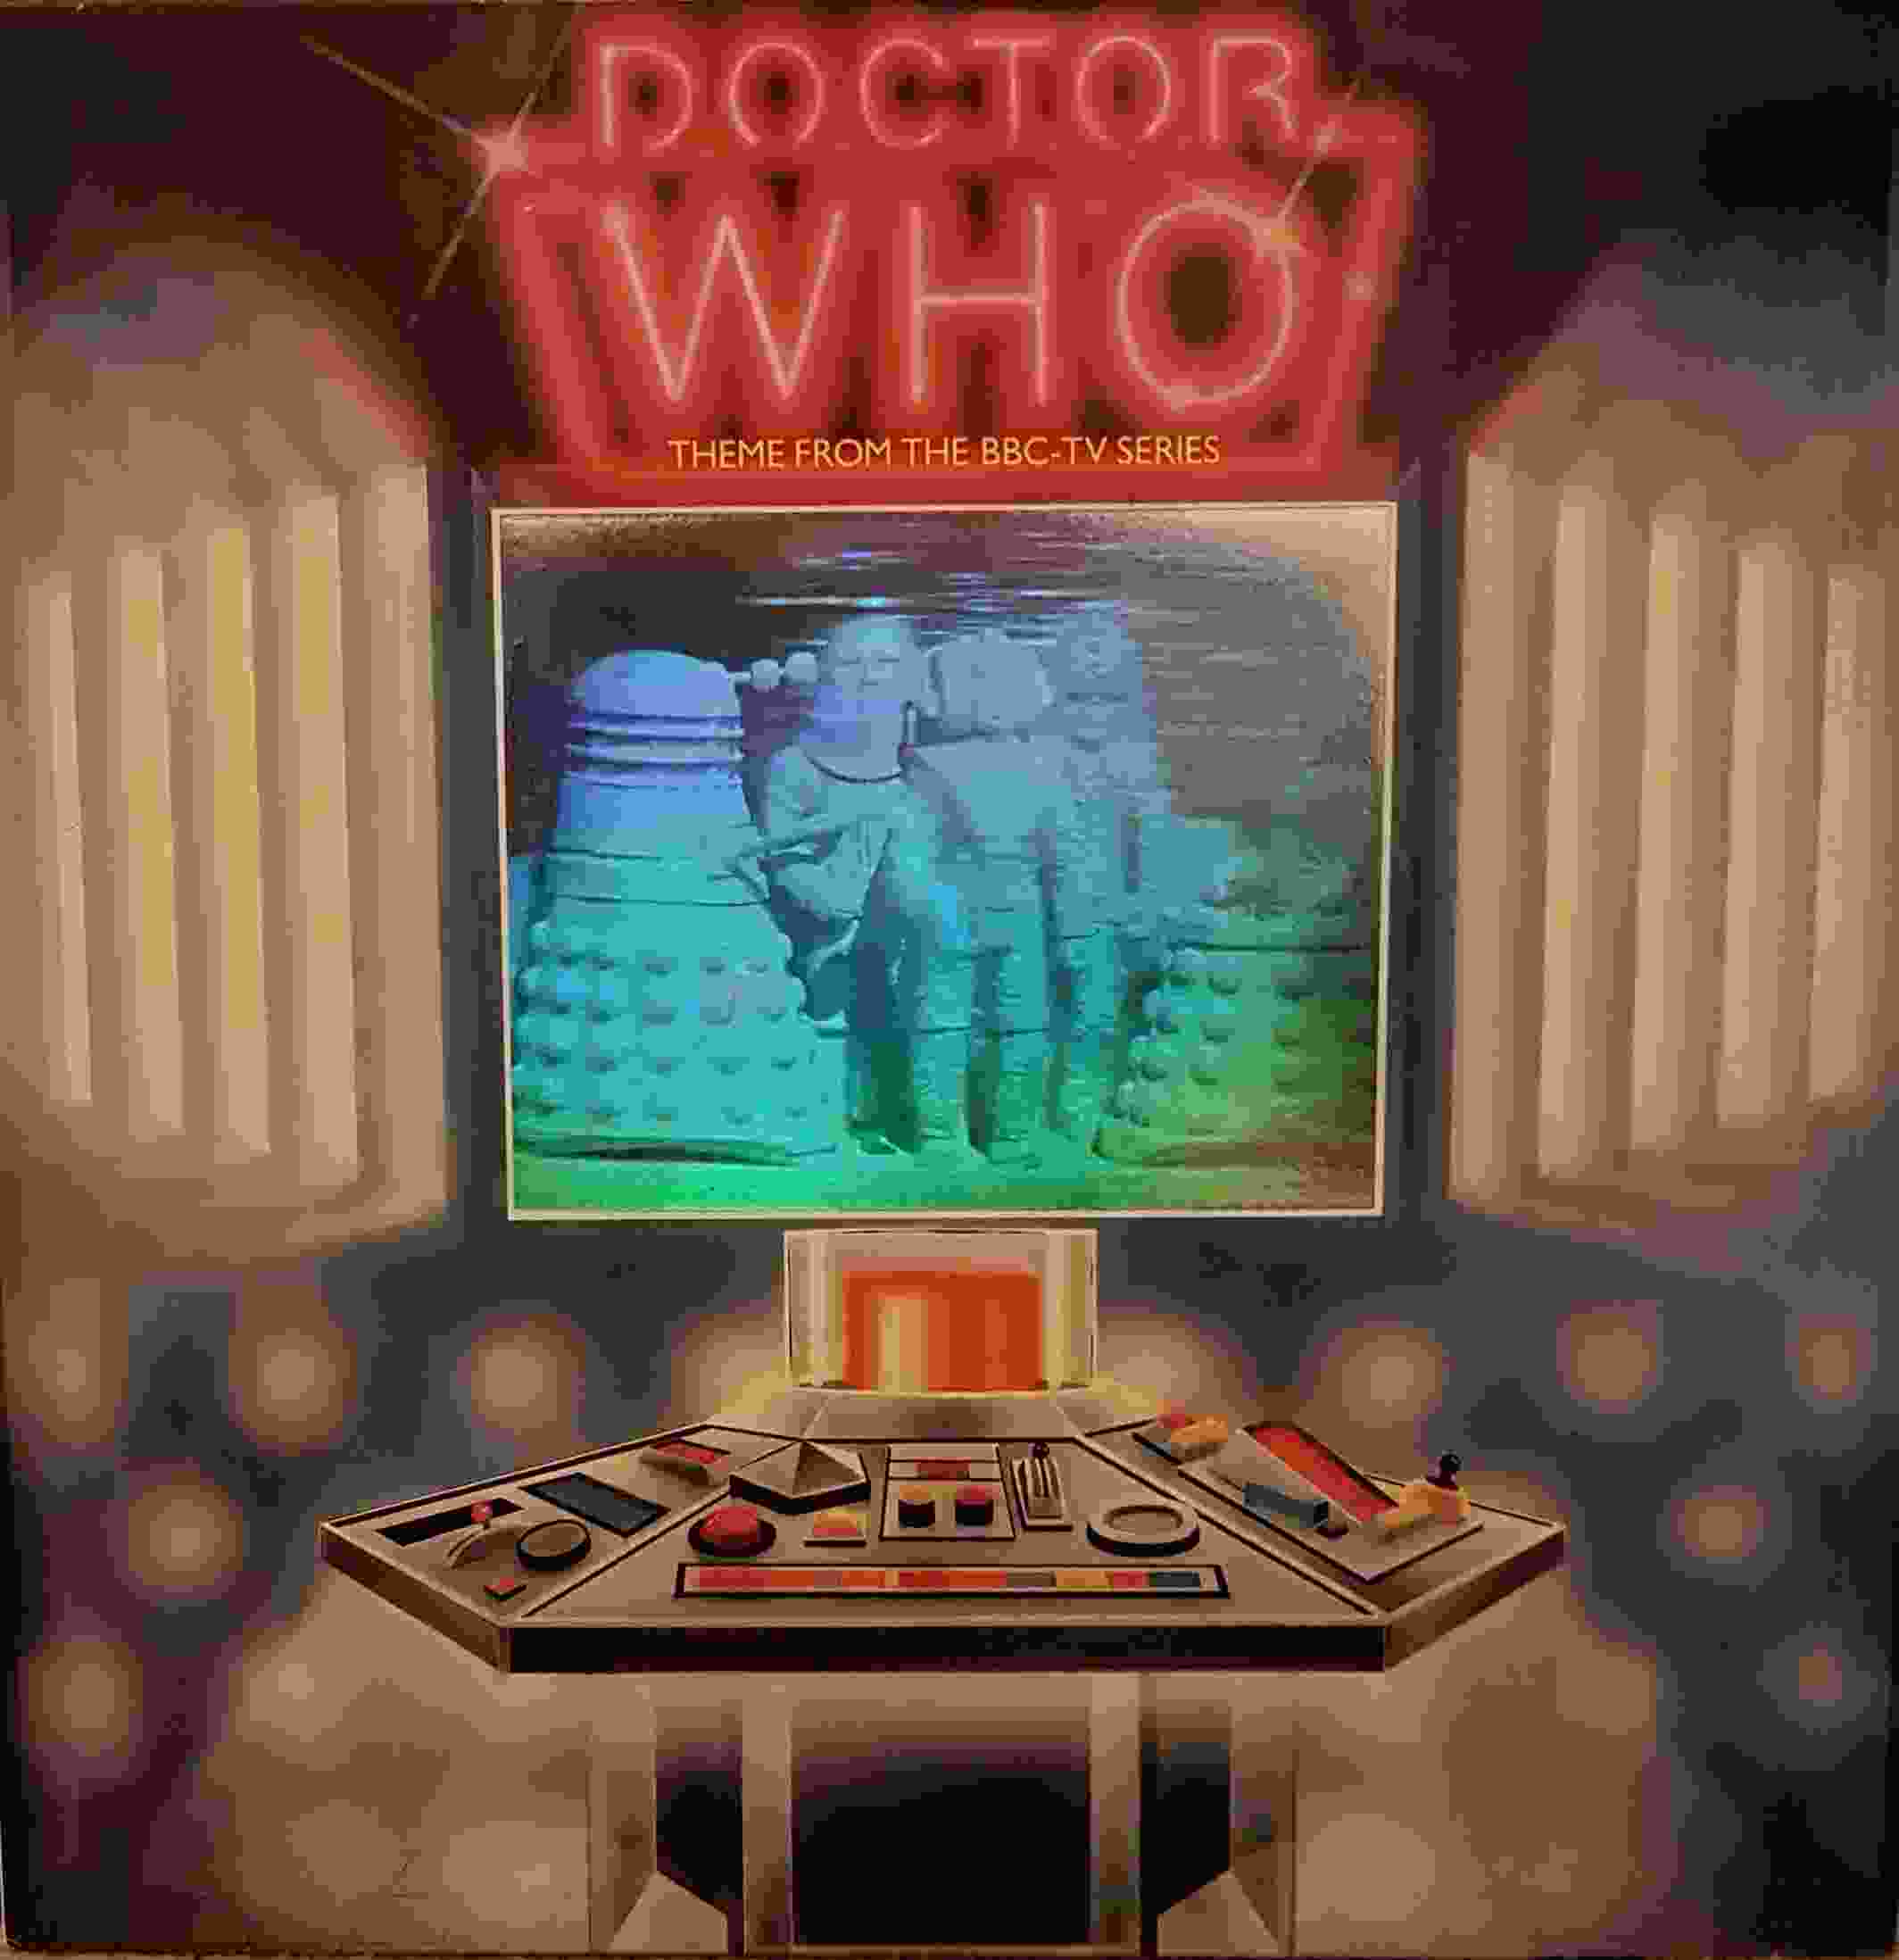 Picture of ZRXL 193 Doctor who by artist Ron Grainer / Dominic Glynn / Mankind from the BBC records and Tapes library